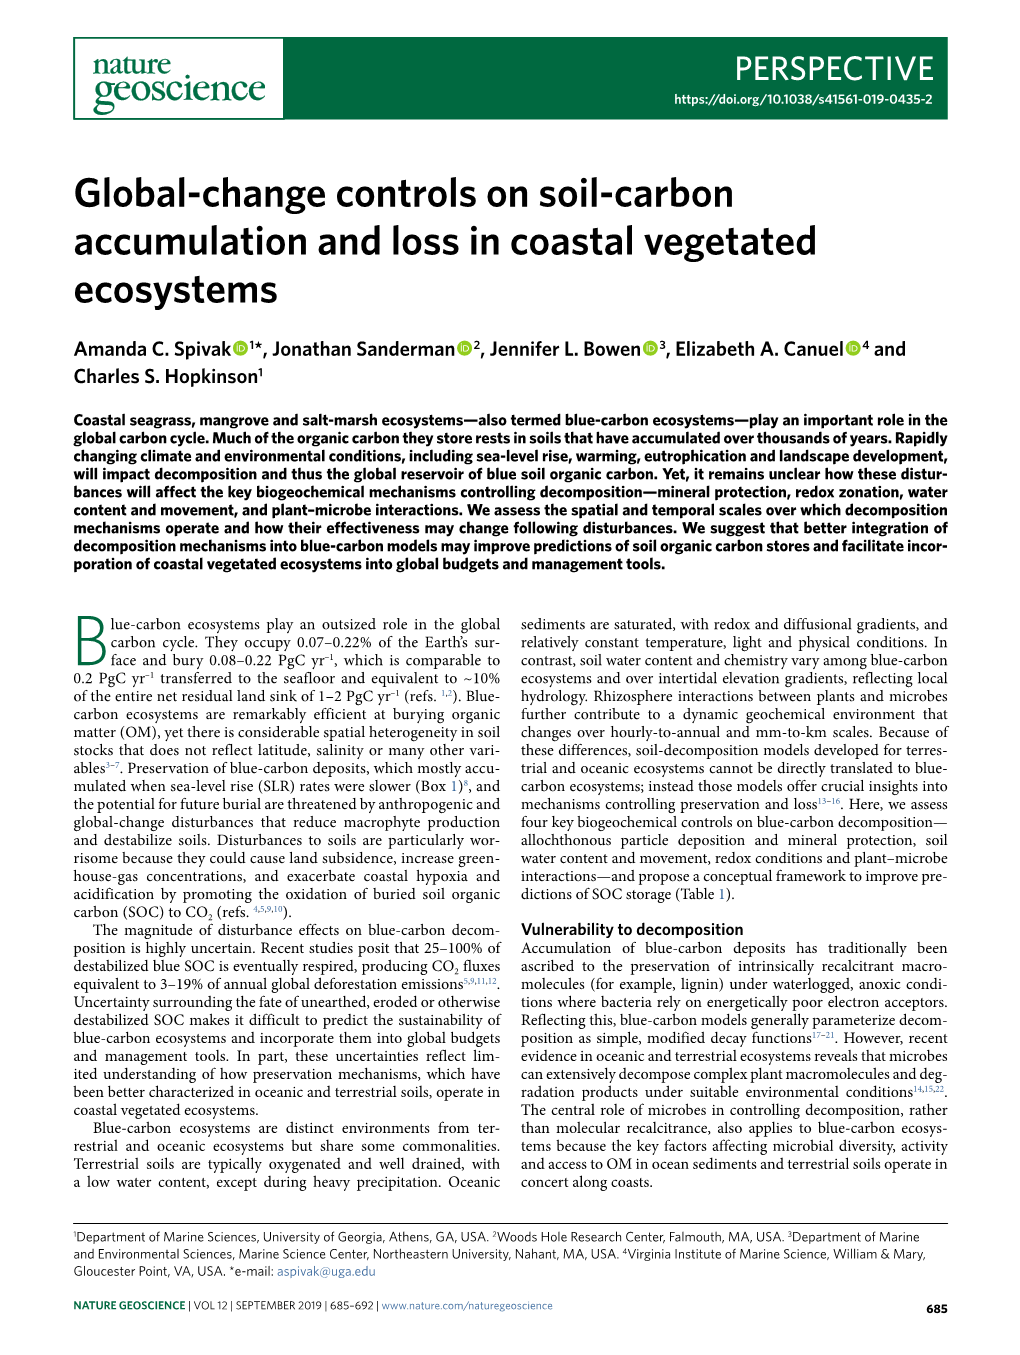 Global-Change Controls on Soil-Carbon Accumulation and Loss in Coastal Vegetated Ecosystems